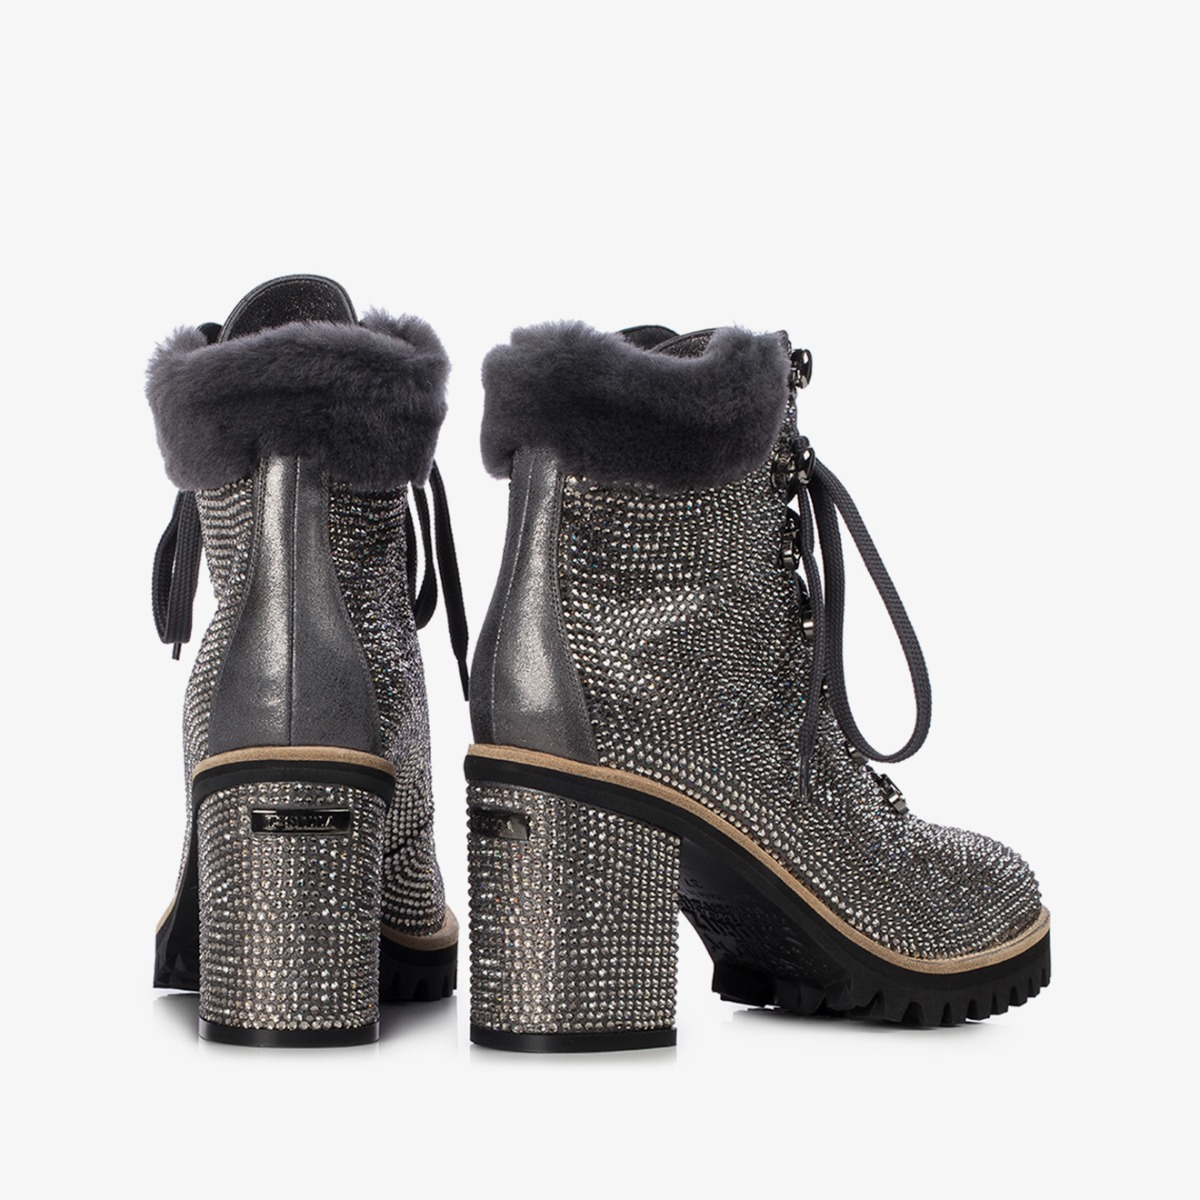 ST. MORITZ ANKLE BOOT 90 mm - Le Silla official outlet